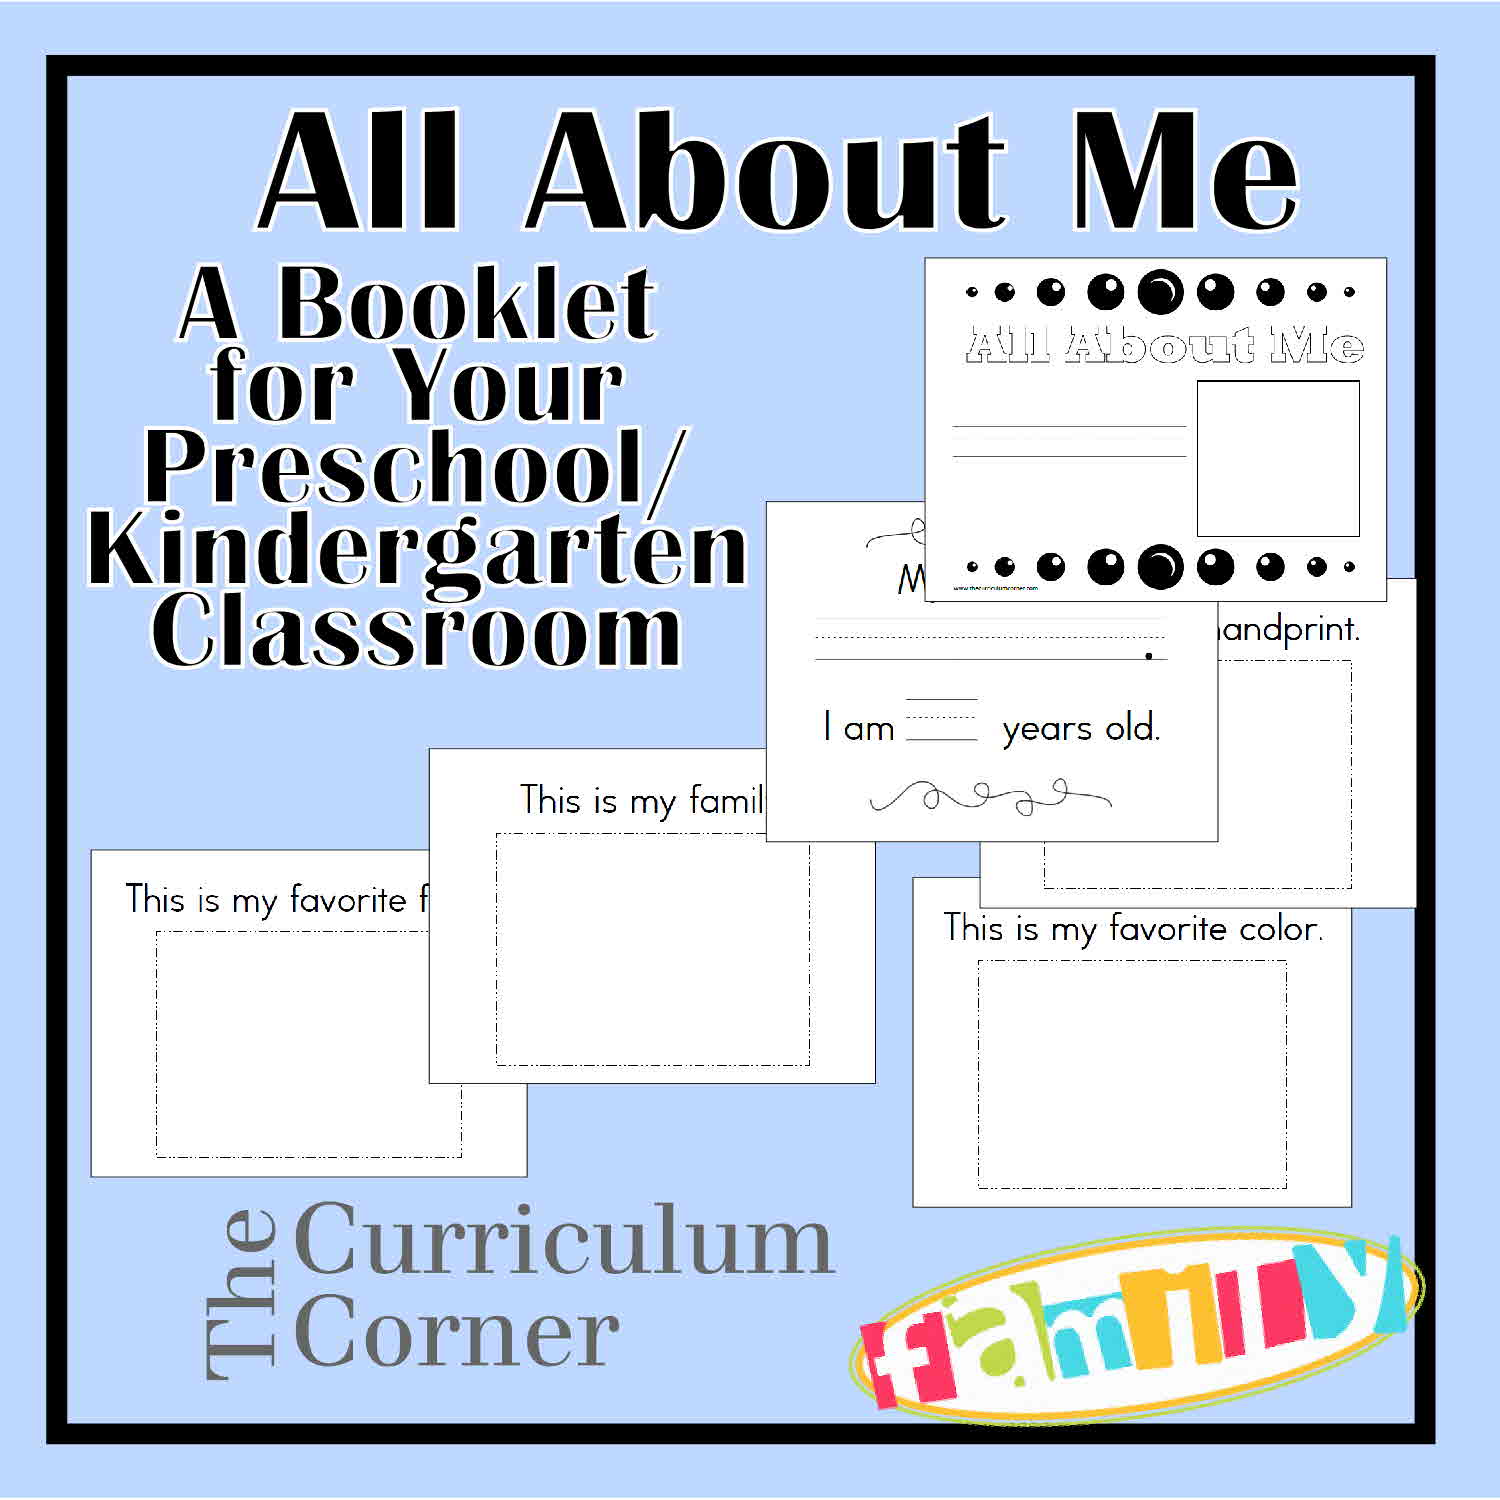 All About Me Booklet from The Curriculum Corner